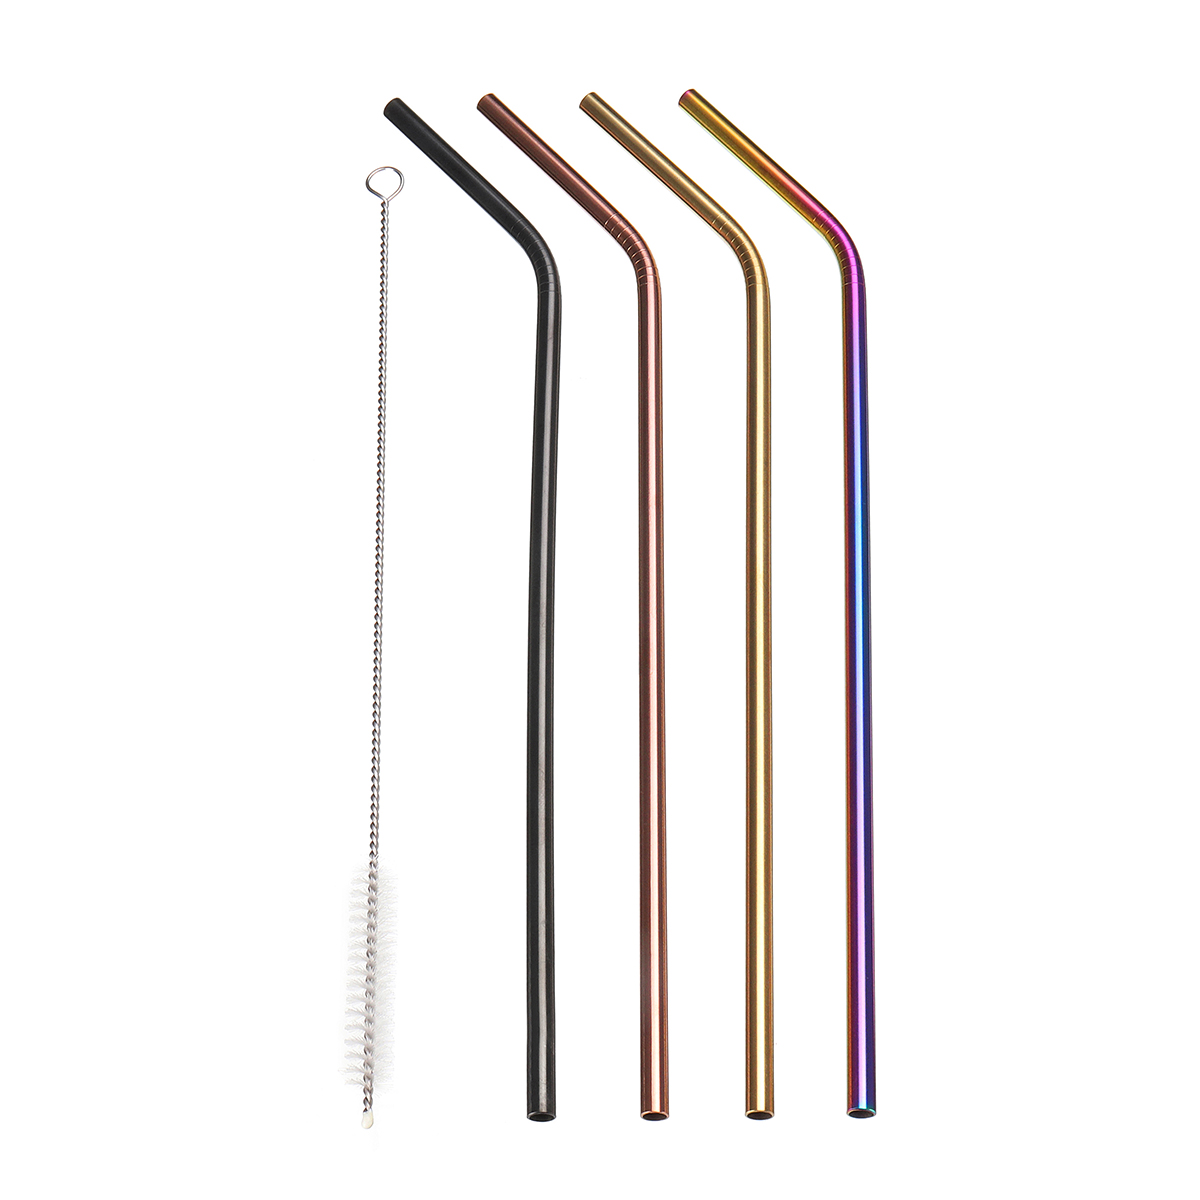 

5Pcs Bent Colored Stainless Steel Metal Drinking Straw Set Reusable Straws With Cleaner Brush Kit